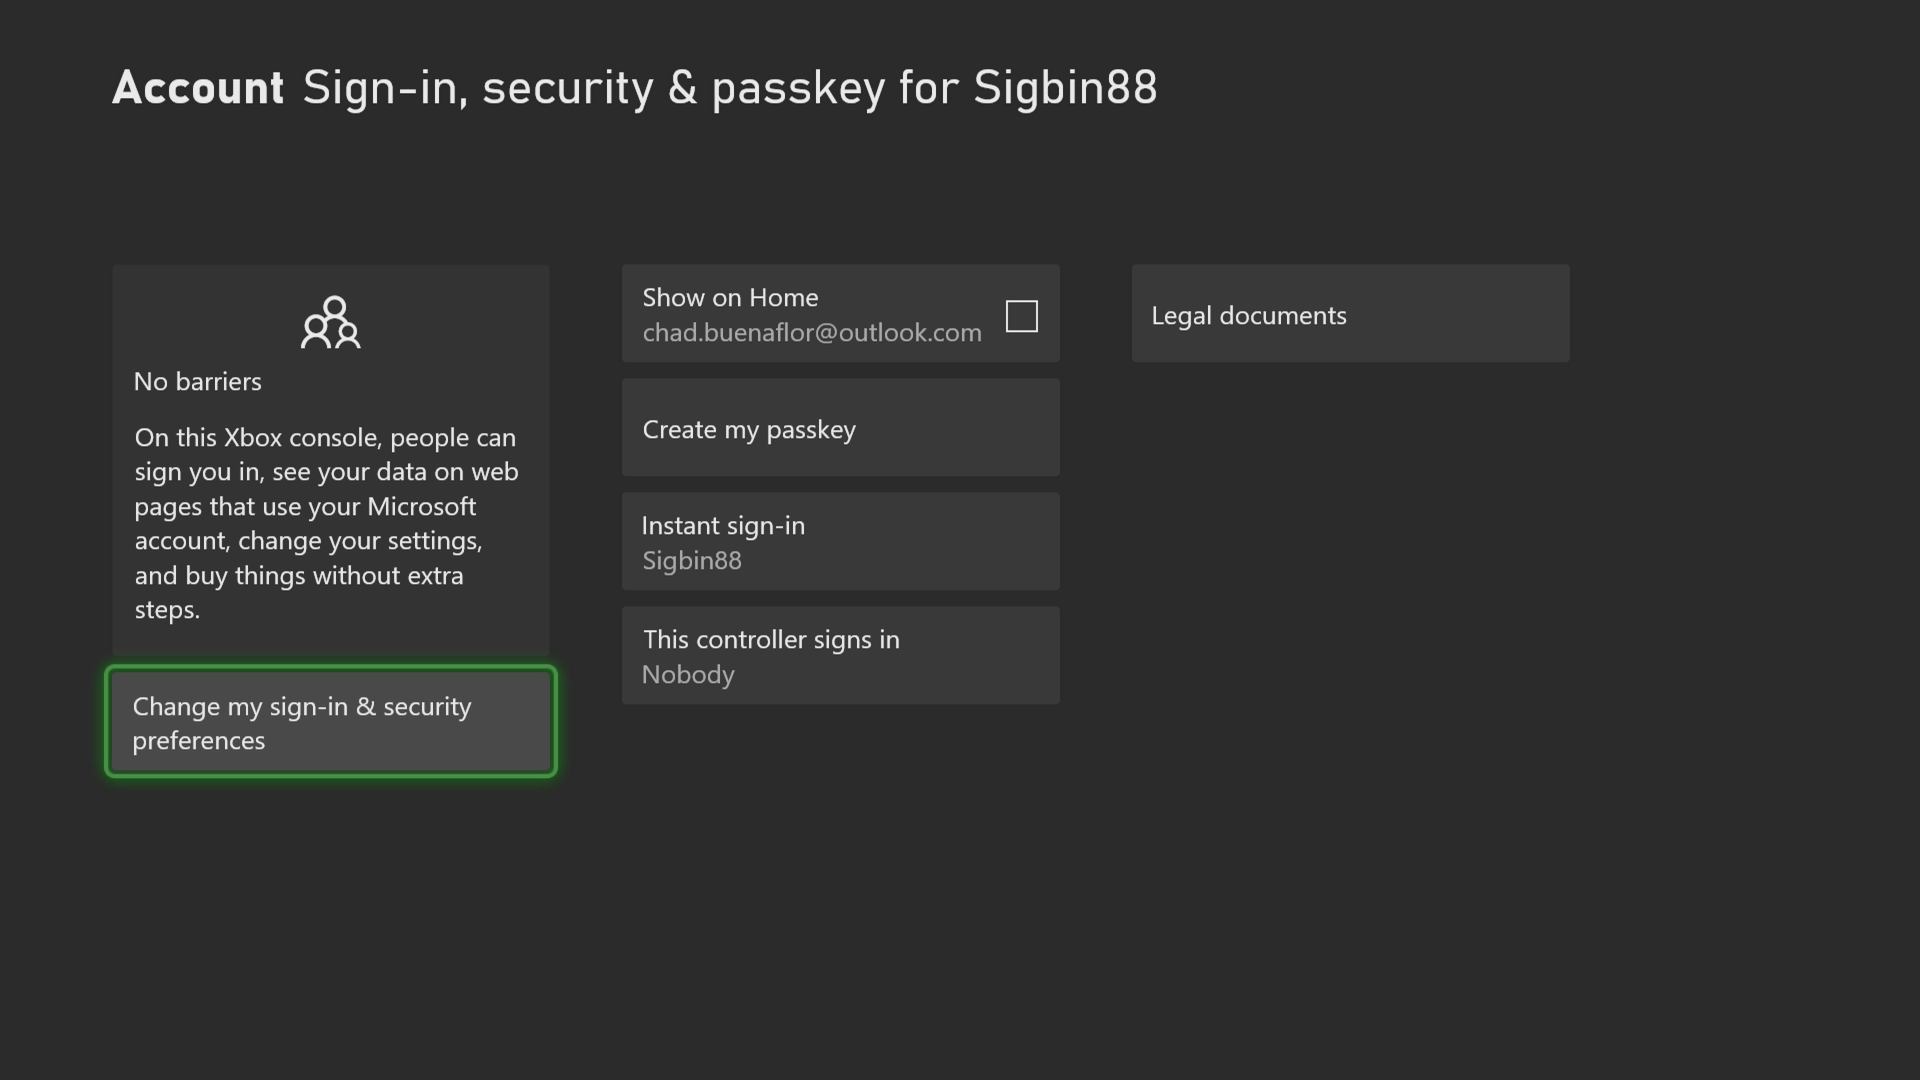 Select Change my sign-in & security preferences